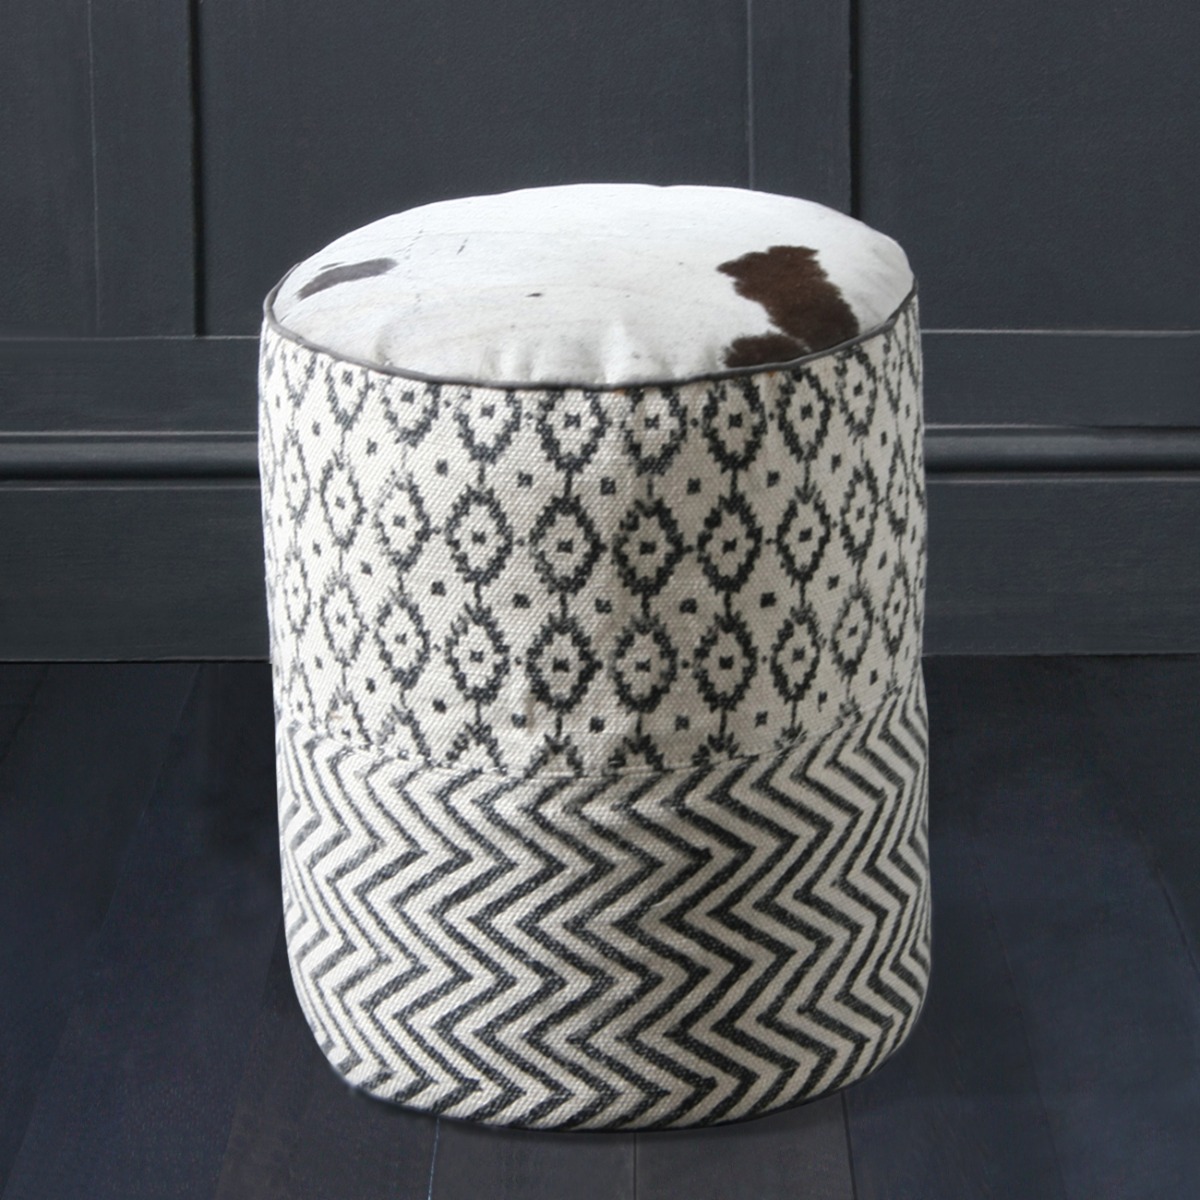 Hygge is all about comfort, something our Round Pouffe knows all too well!